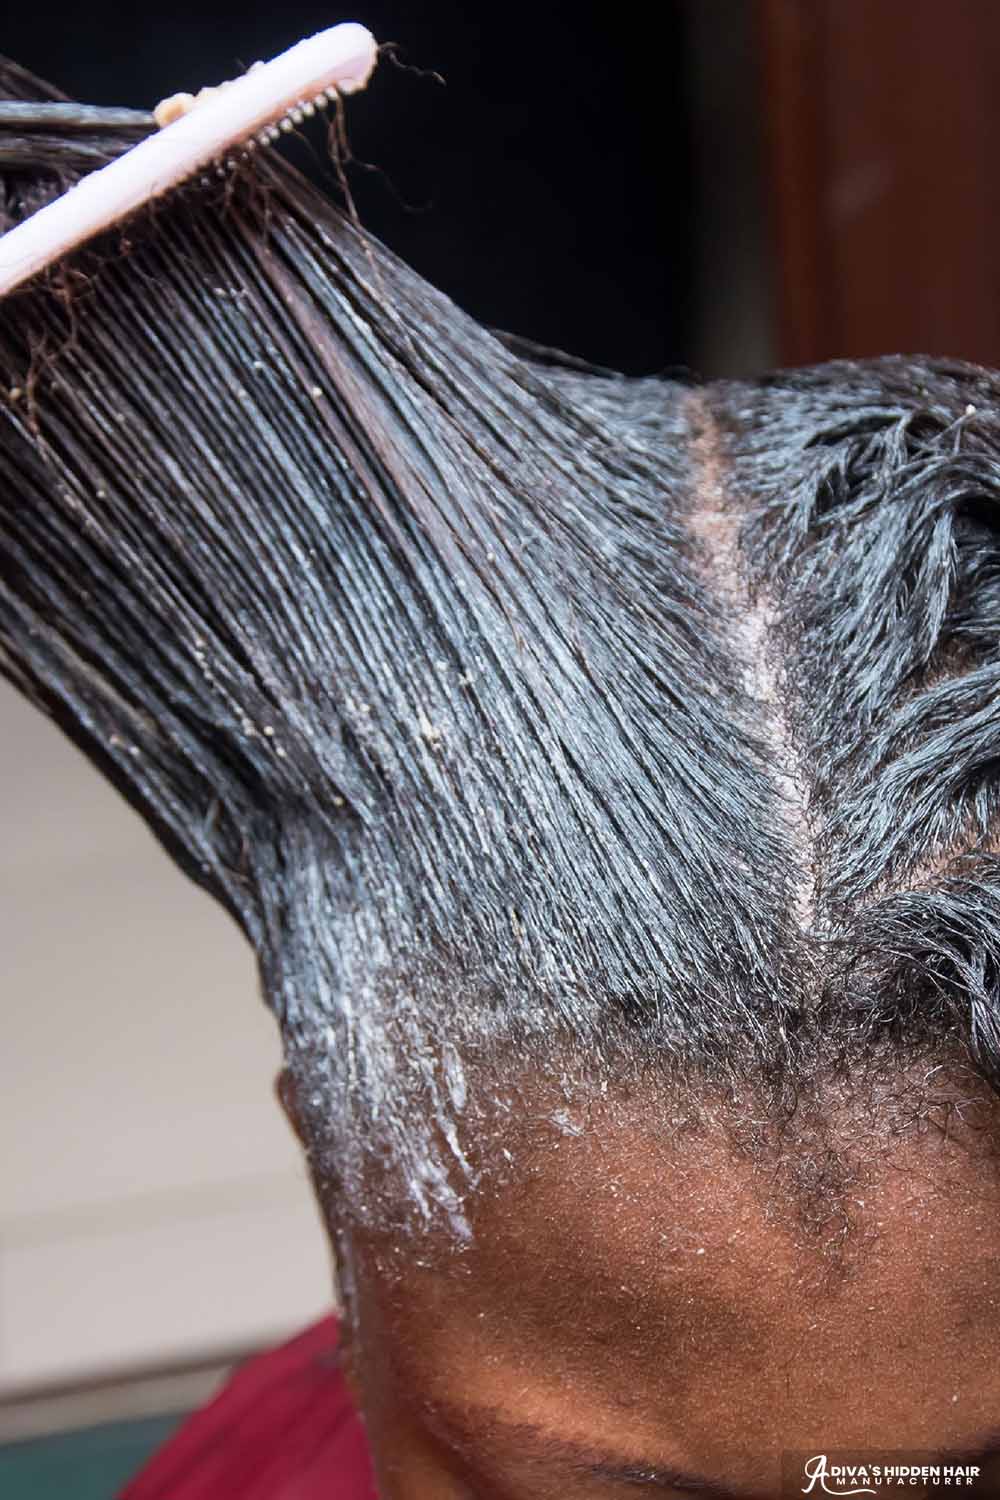 Safety First When Applying A Hair Relaxer